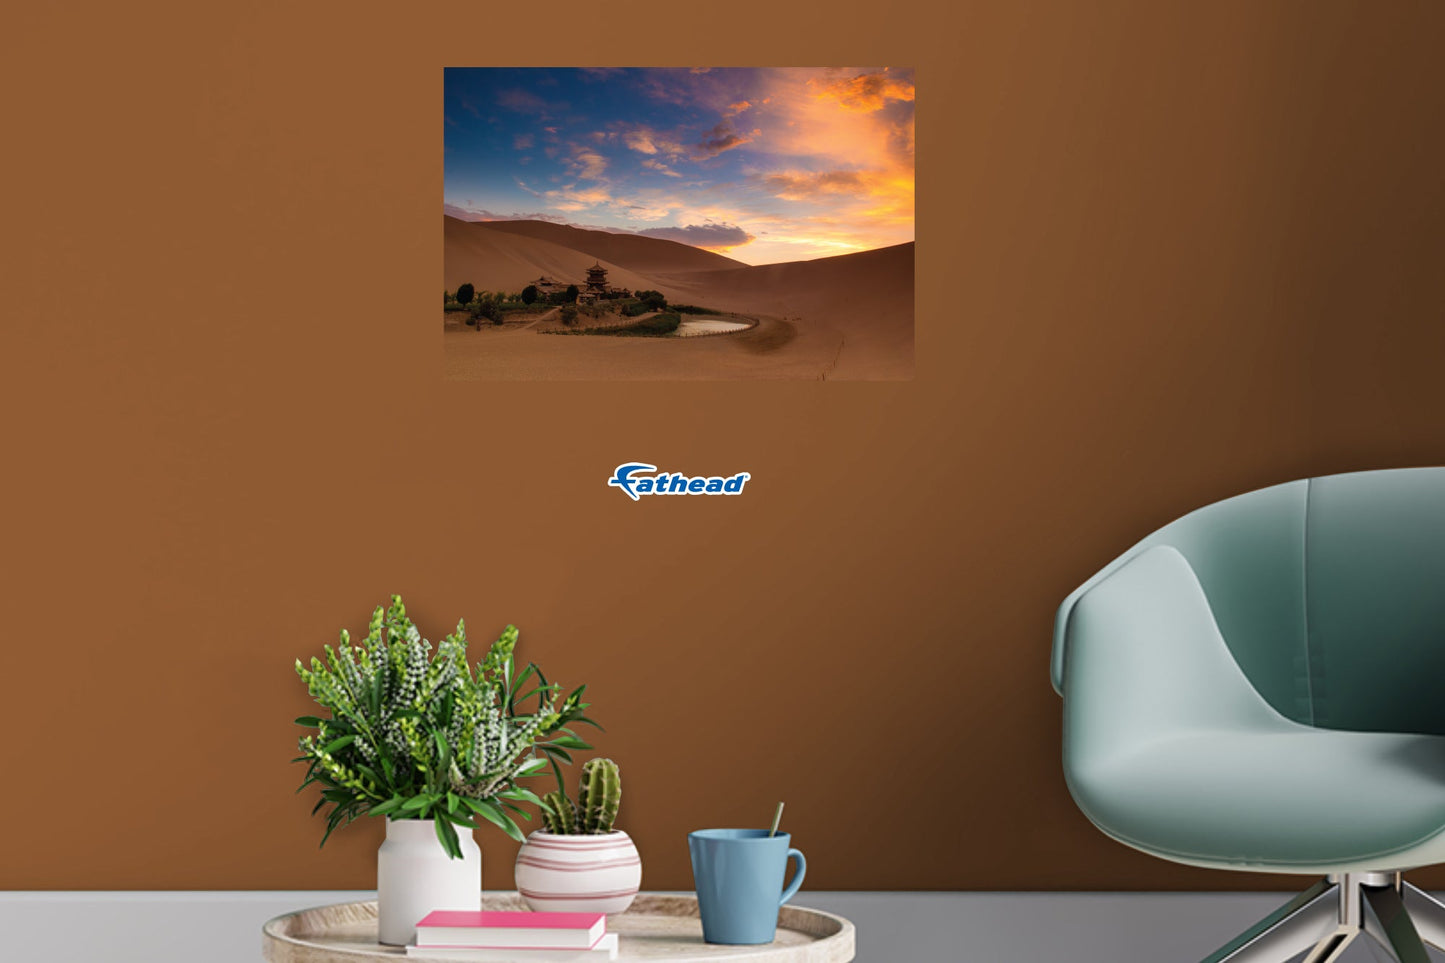 Generic Scenery: Hidden Place Poster - Removable Adhesive Decal